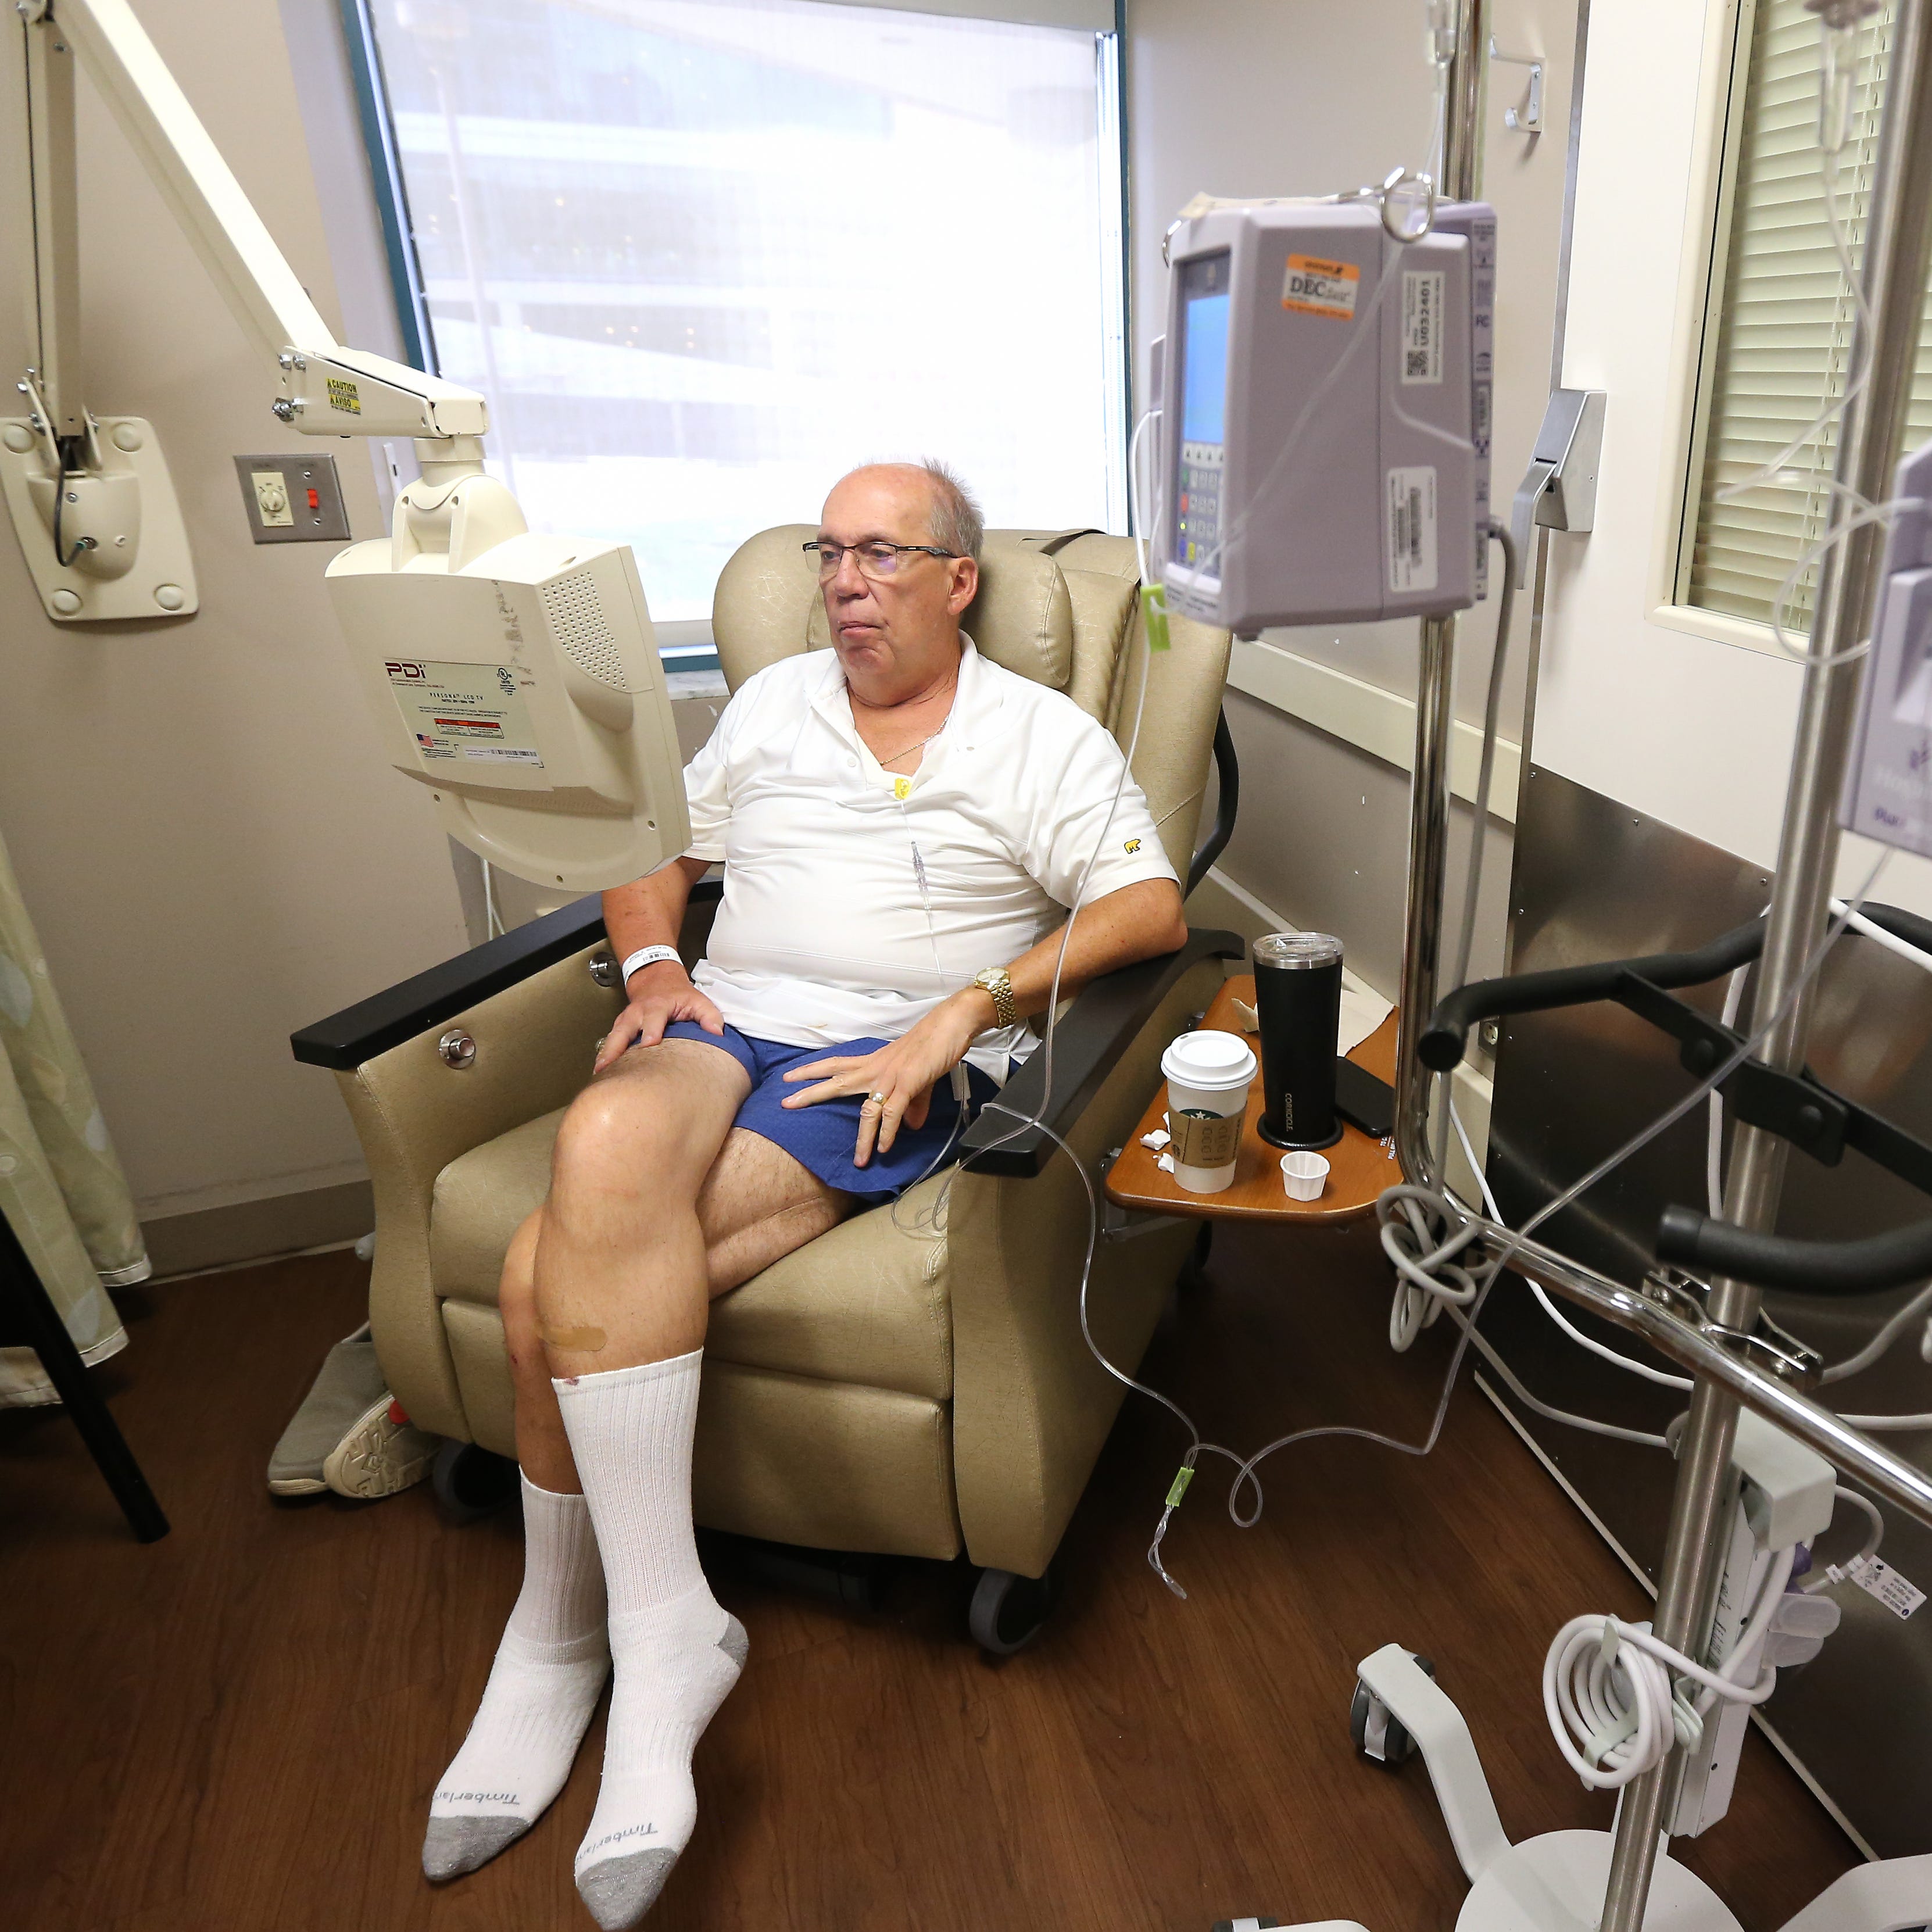 Bob Rulli undergoes a transfusion of the experimental drug BXQ-350, which lasted about an hour, Tuesday, July 10, 2018, at the University of Cincinnati's Barrett Cancer Center in Cincinnati.